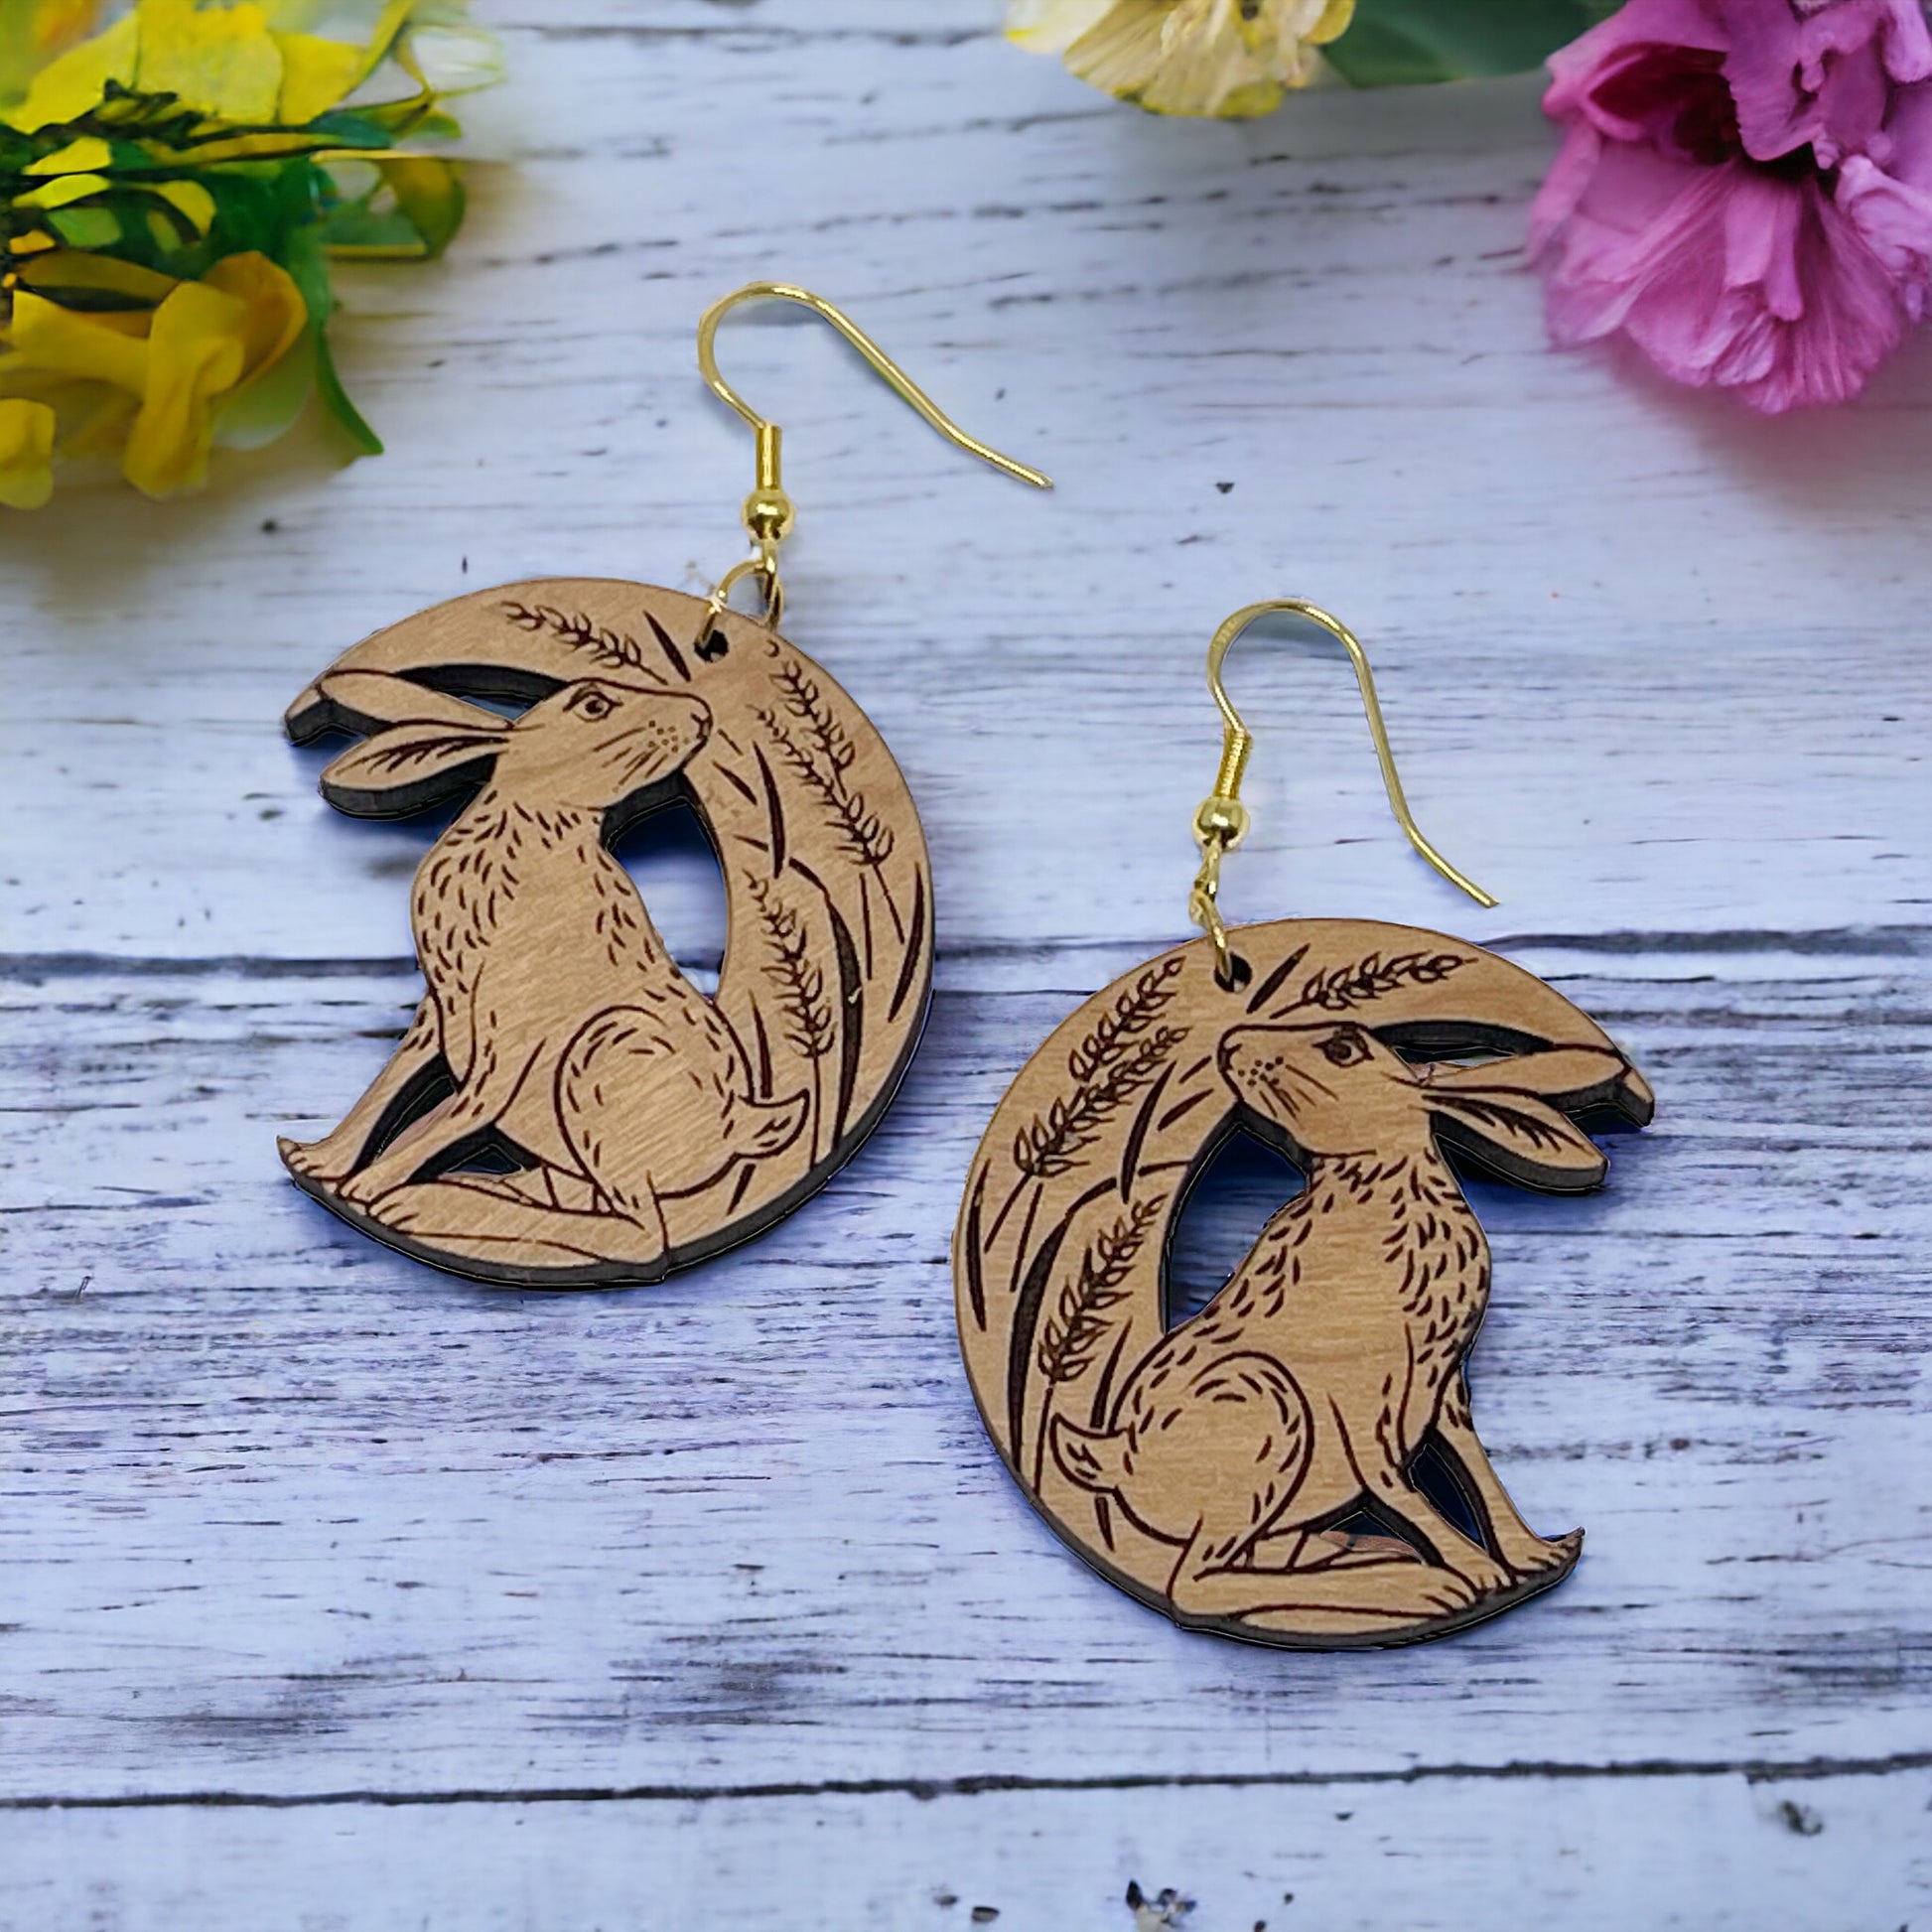 Wooden Bunny Earrings with Crescent Moon & Wheat Design - Whimsical and Nature-Inspired Accessories